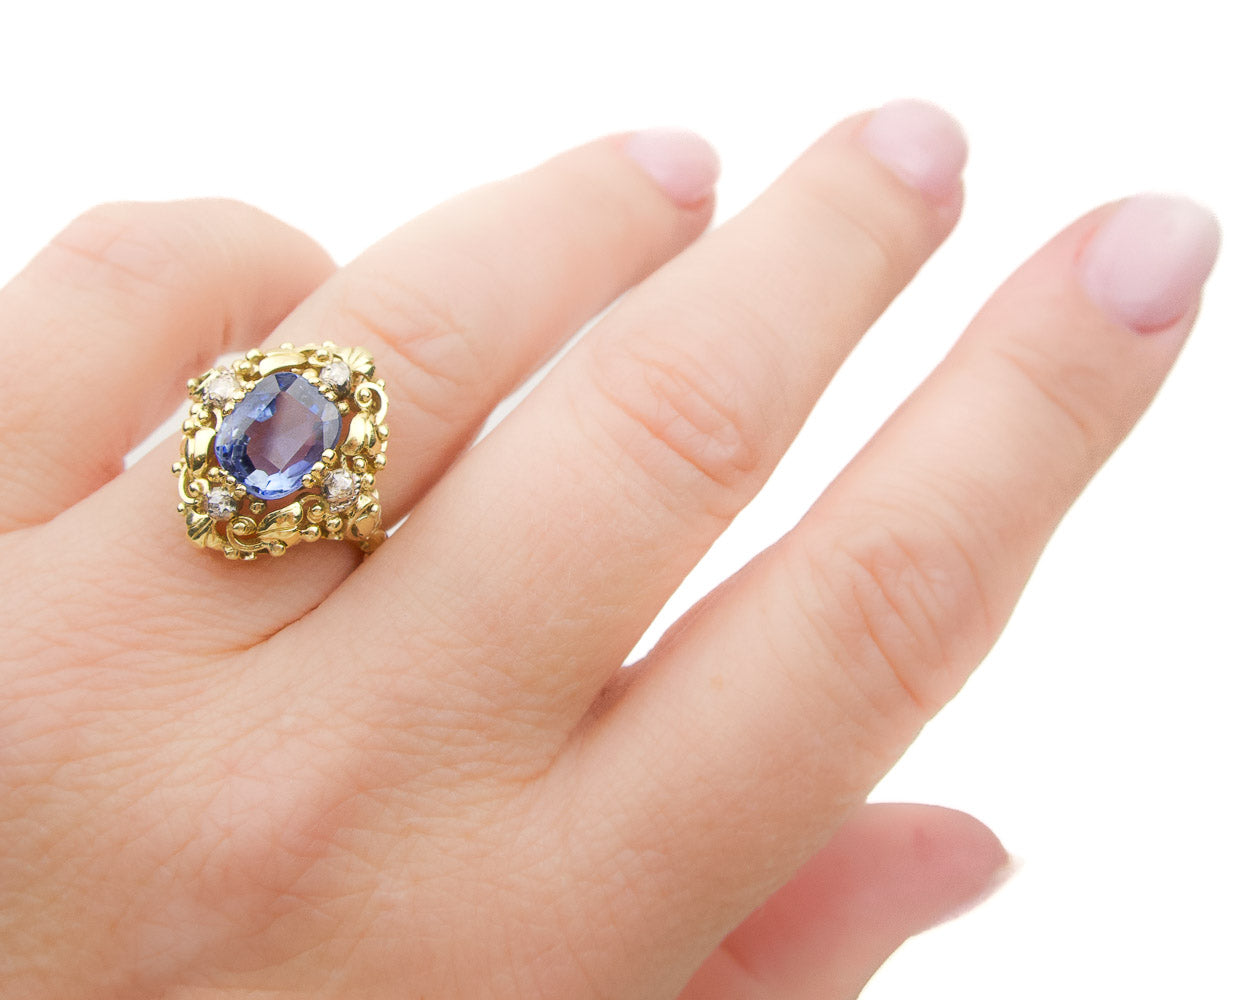 Midcentury Victorian Revival Sapphire Ring